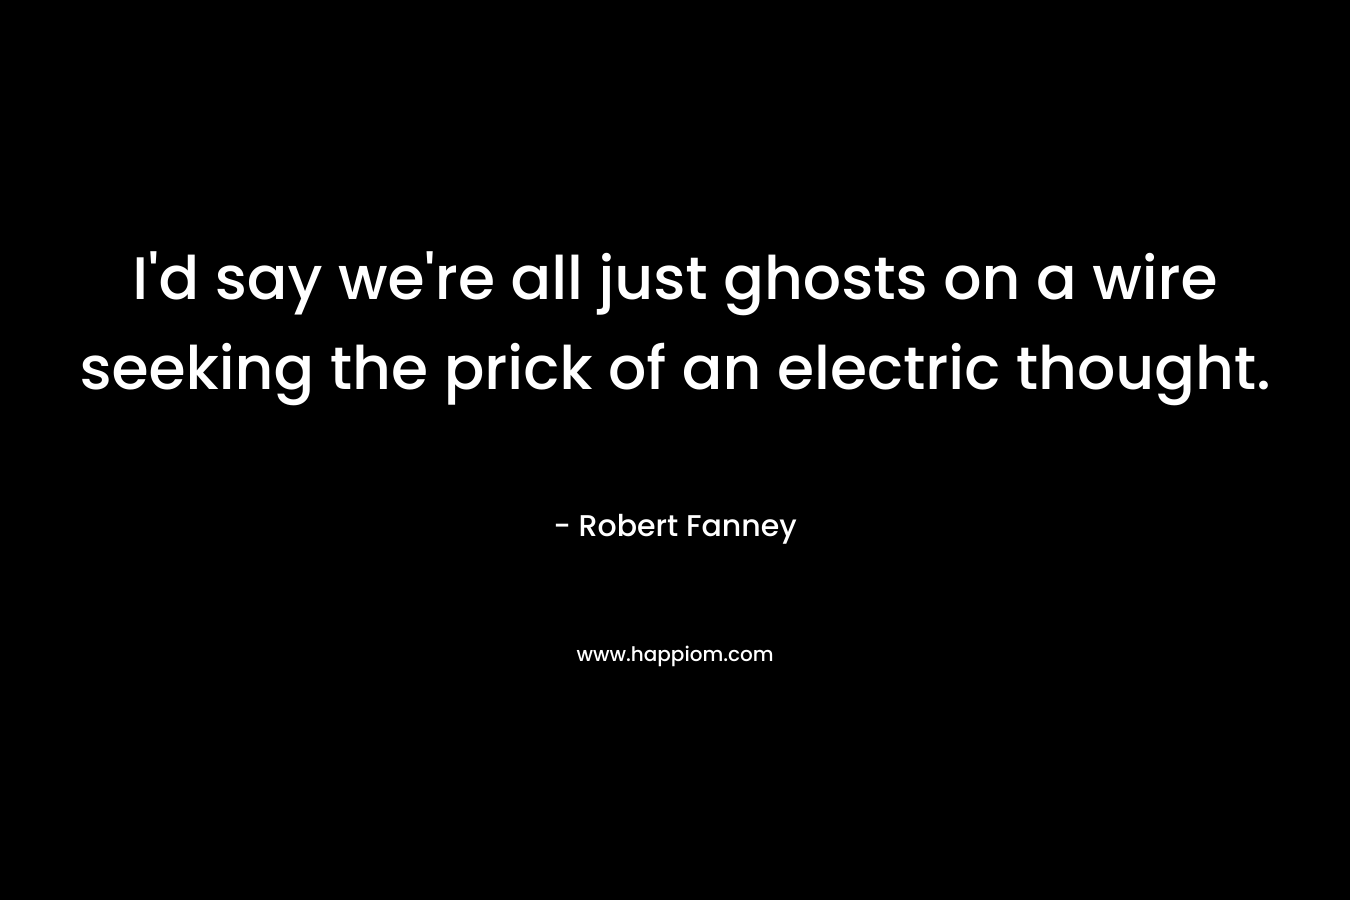 I'd say we're all just ghosts on a wire seeking the prick of an electric thought.